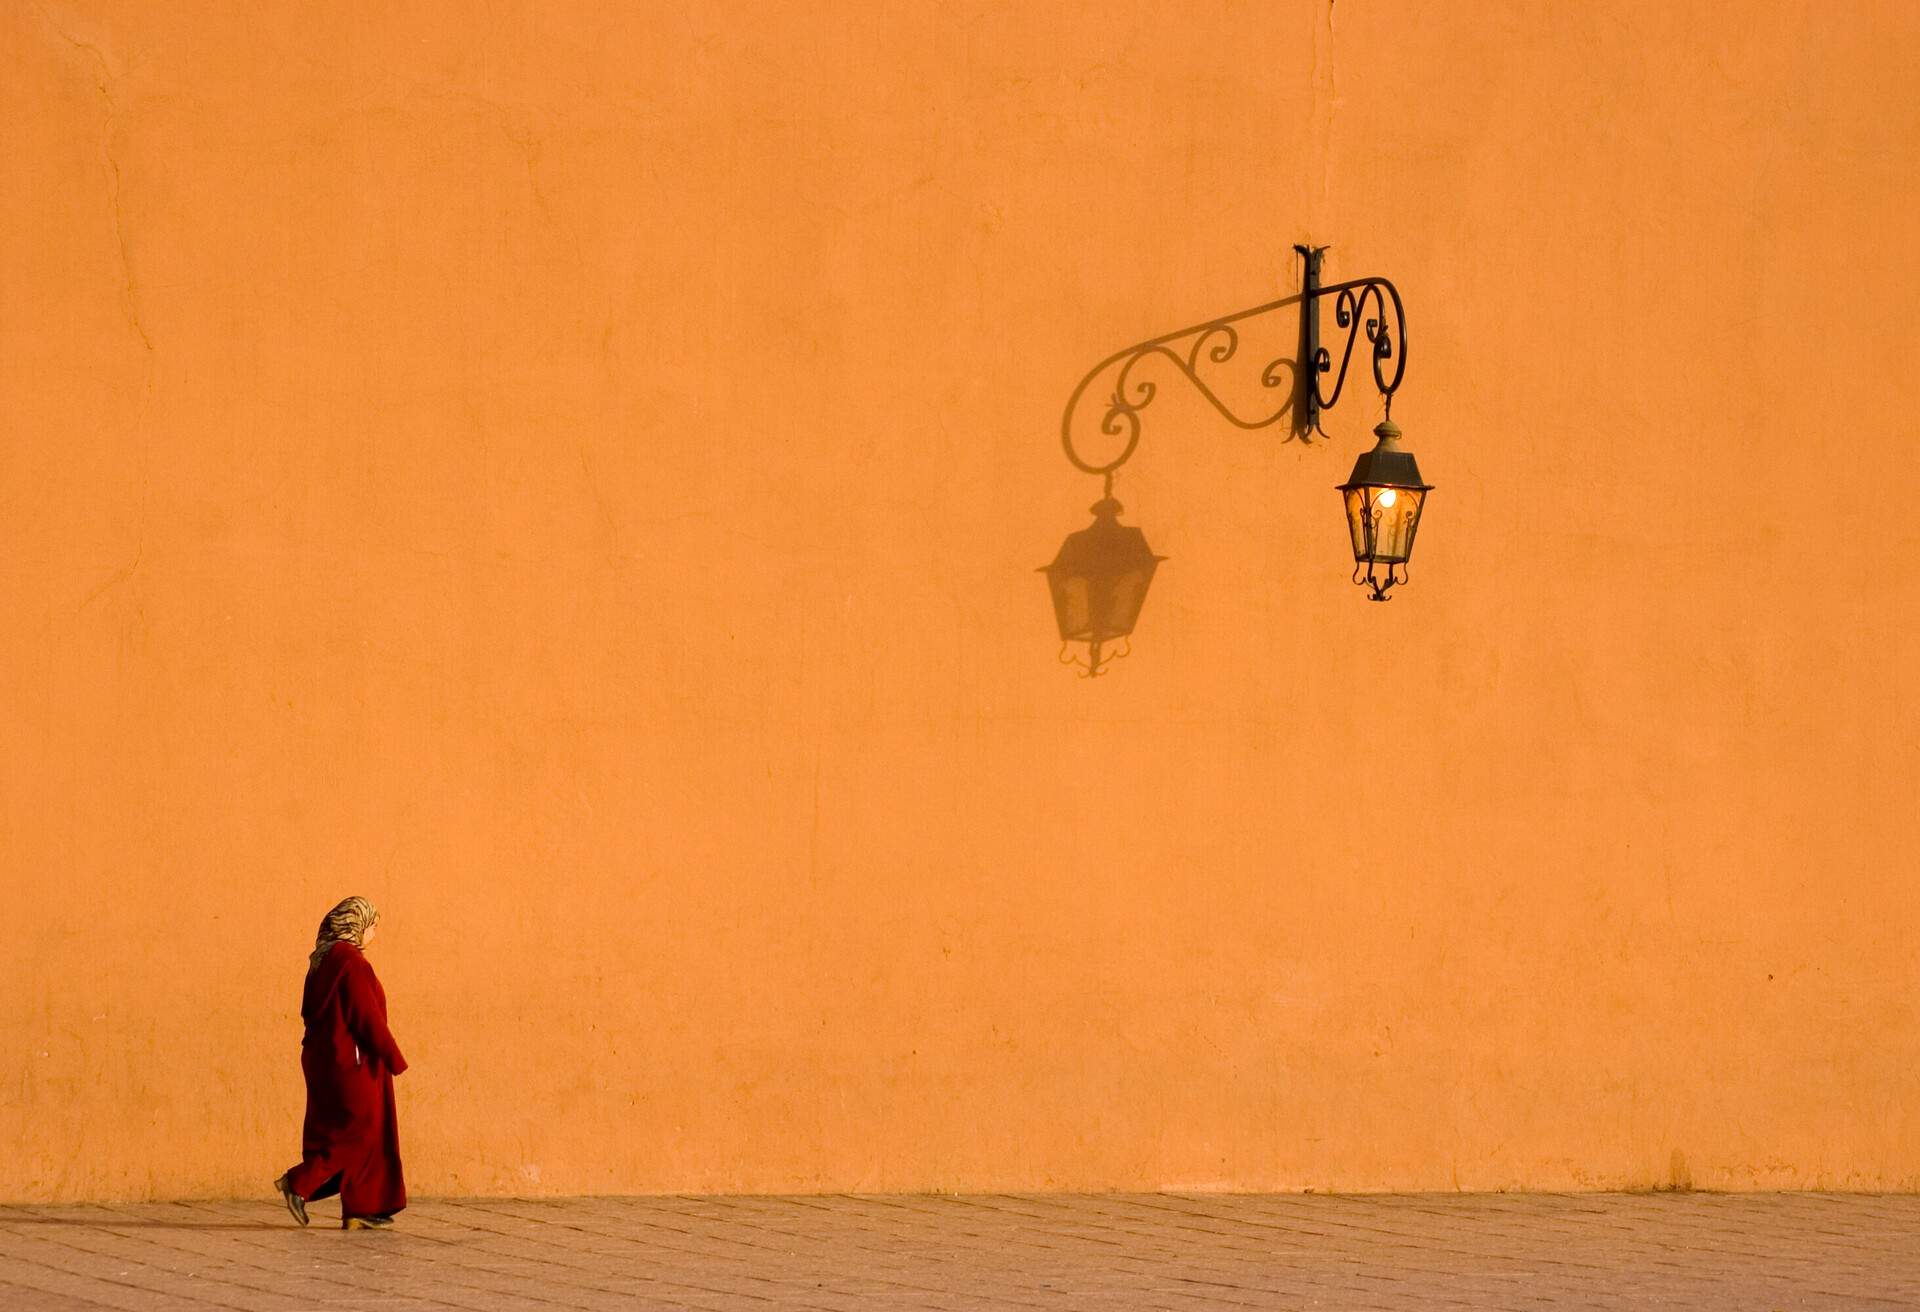 A woman in a traditional red dress walks on a street against the orange wall.